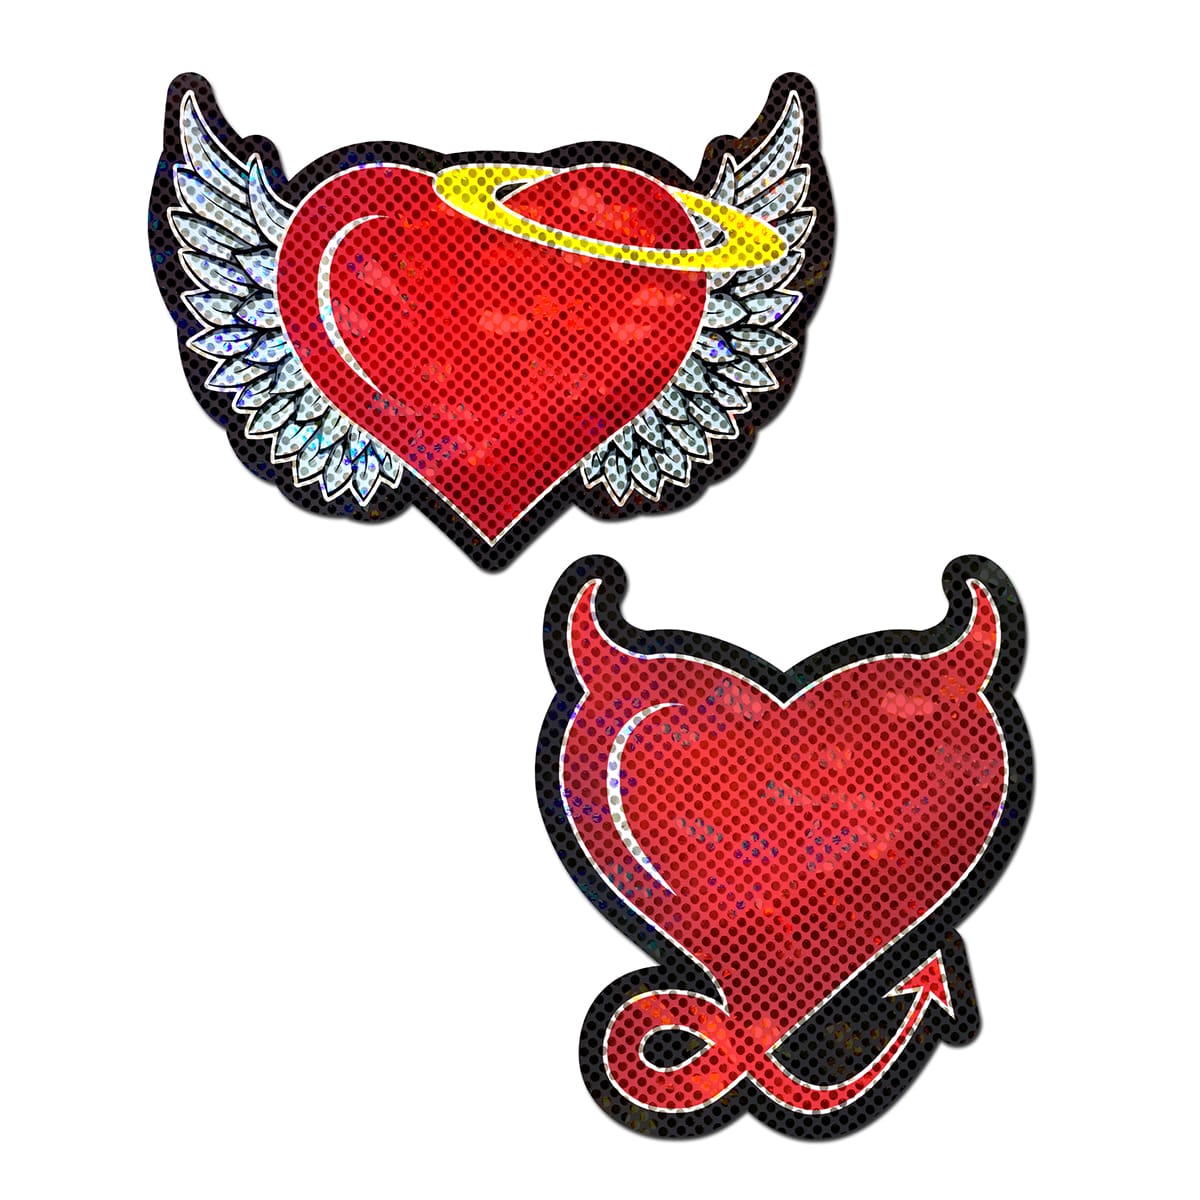 Pastease Angel Devil Hearts pasties for sale and in stock.